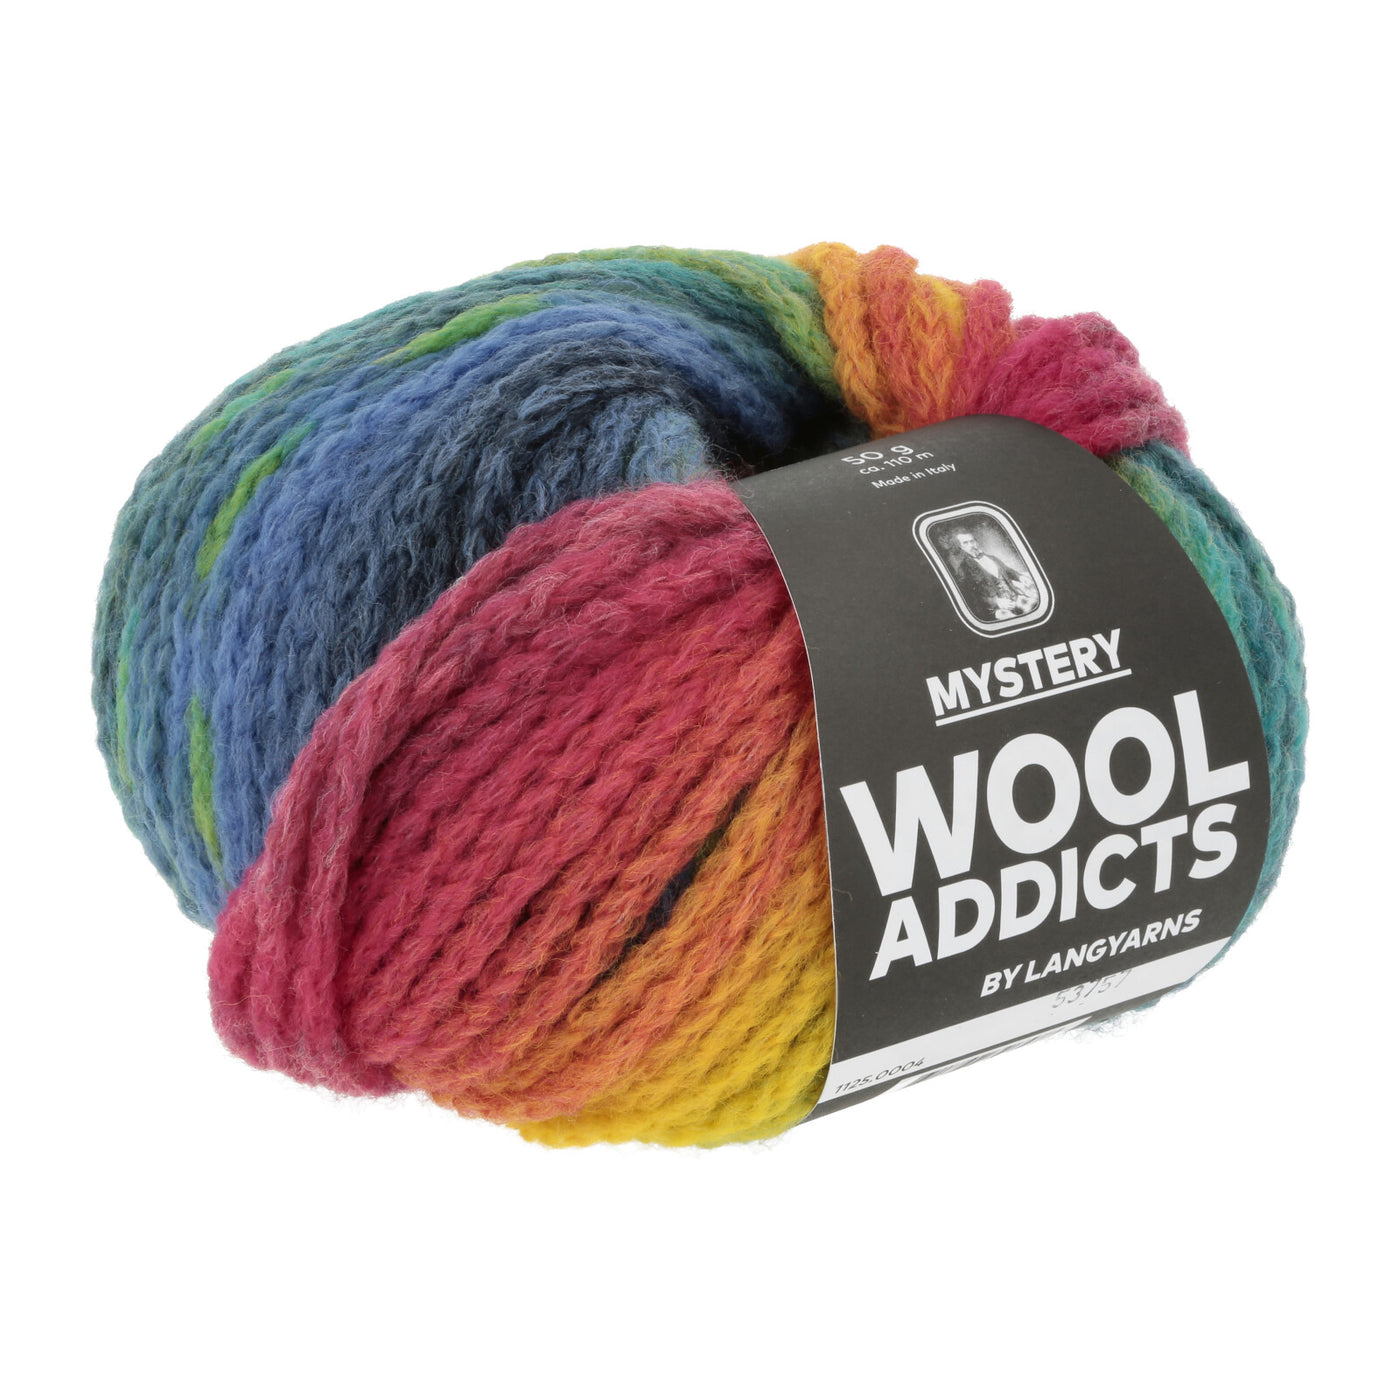 Wool Addicts by LangYarns Mystery